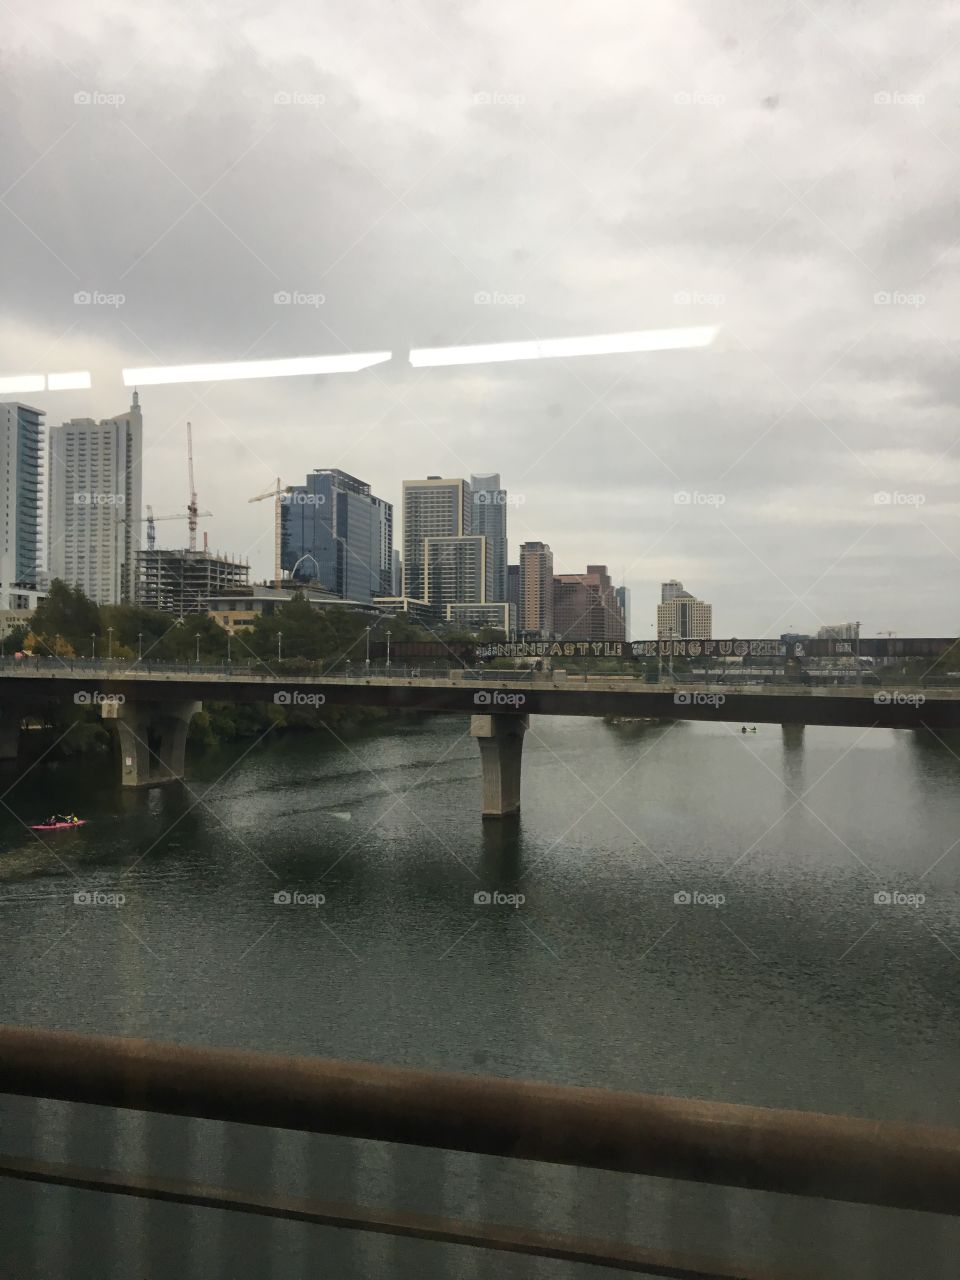 bridge over a River by the city on a rainy day in Austin with a bit of a glare from the bus light 